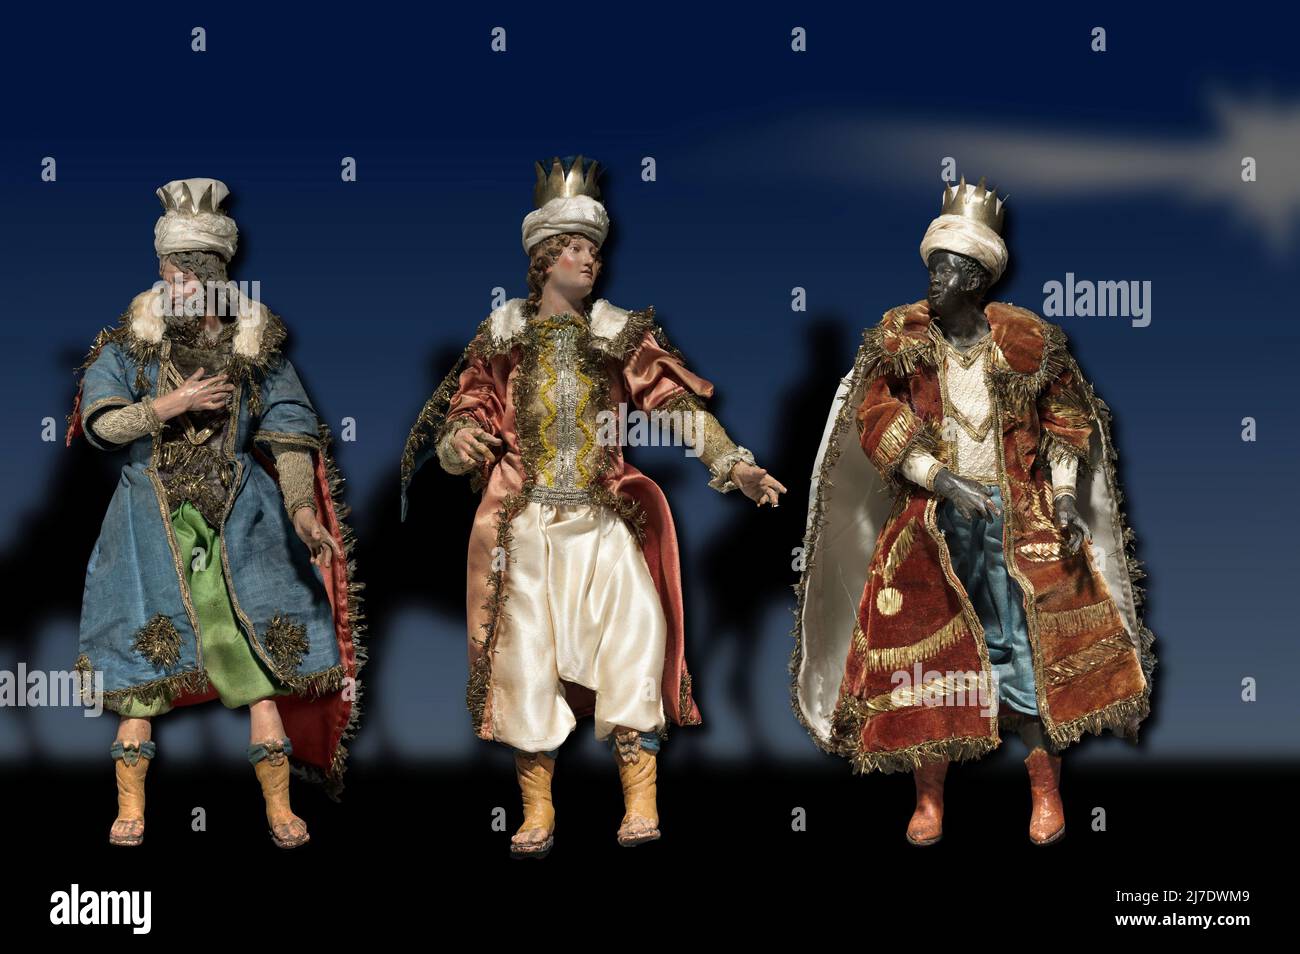 Statuettes depicting the Three Kings in painted wood and terracotta with various fabrics, produced in Naples (Italy) in 1800. Stock Photo